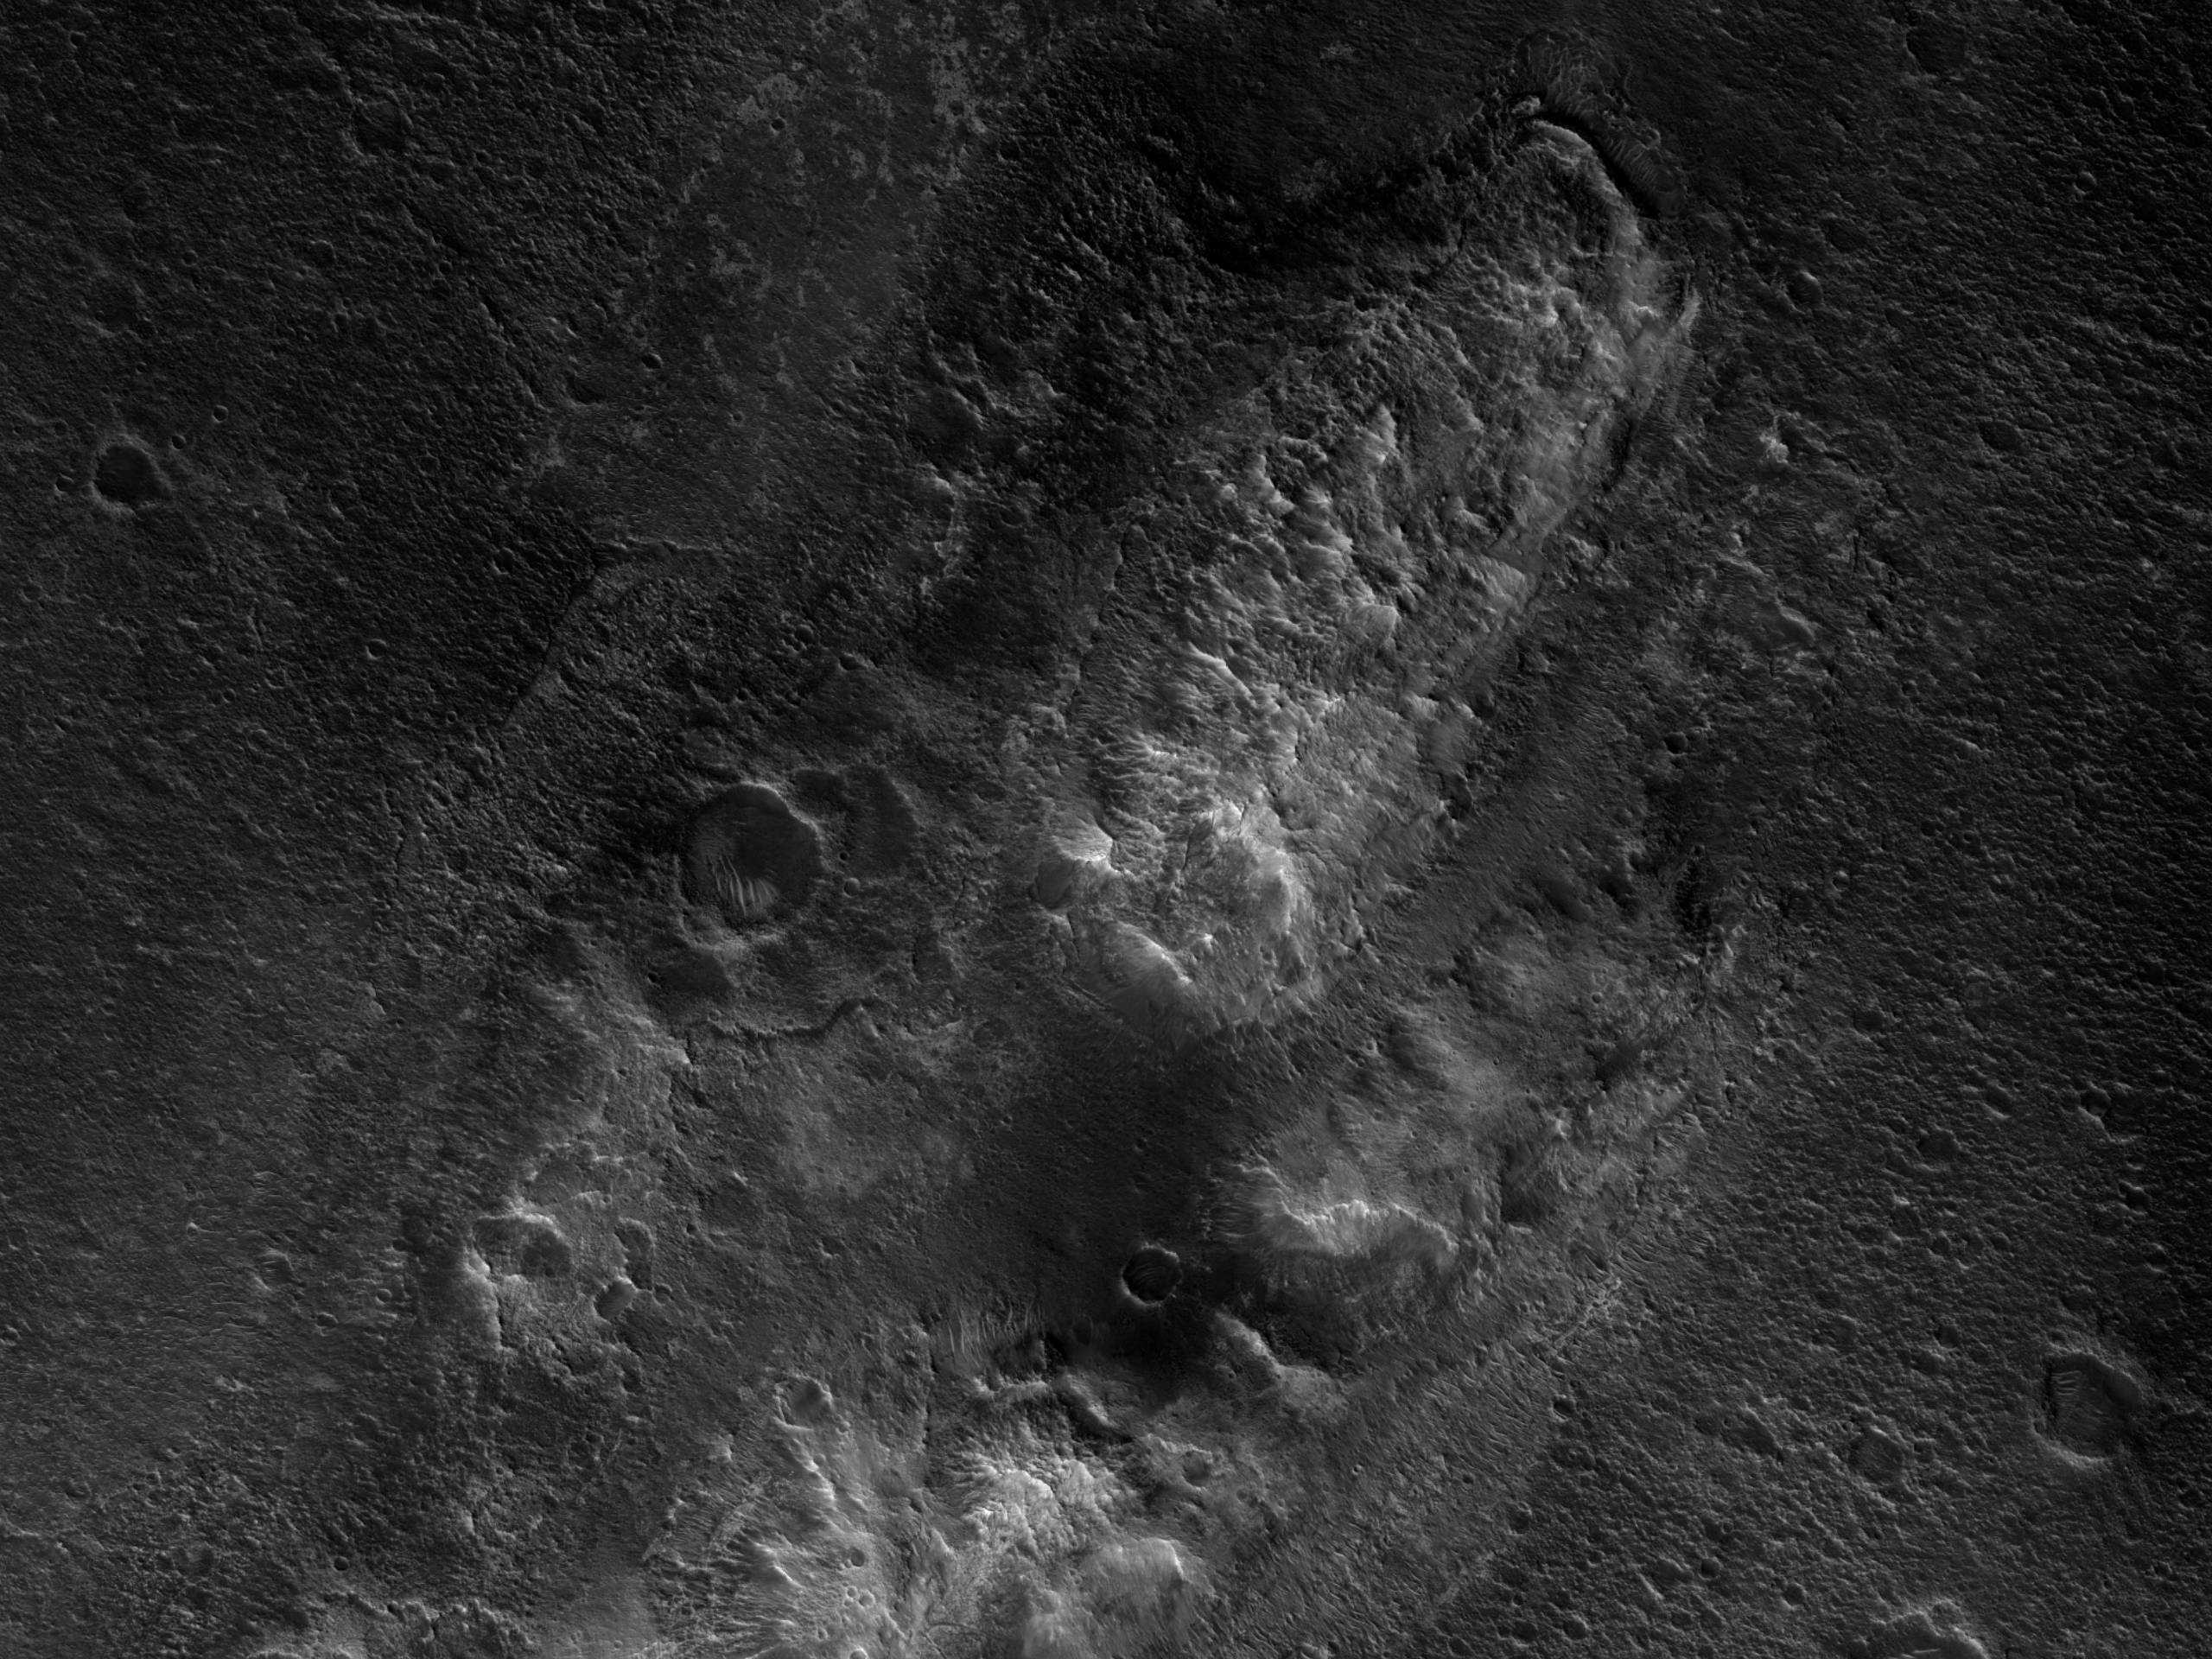 Crater Mounds in Chryse Planitia